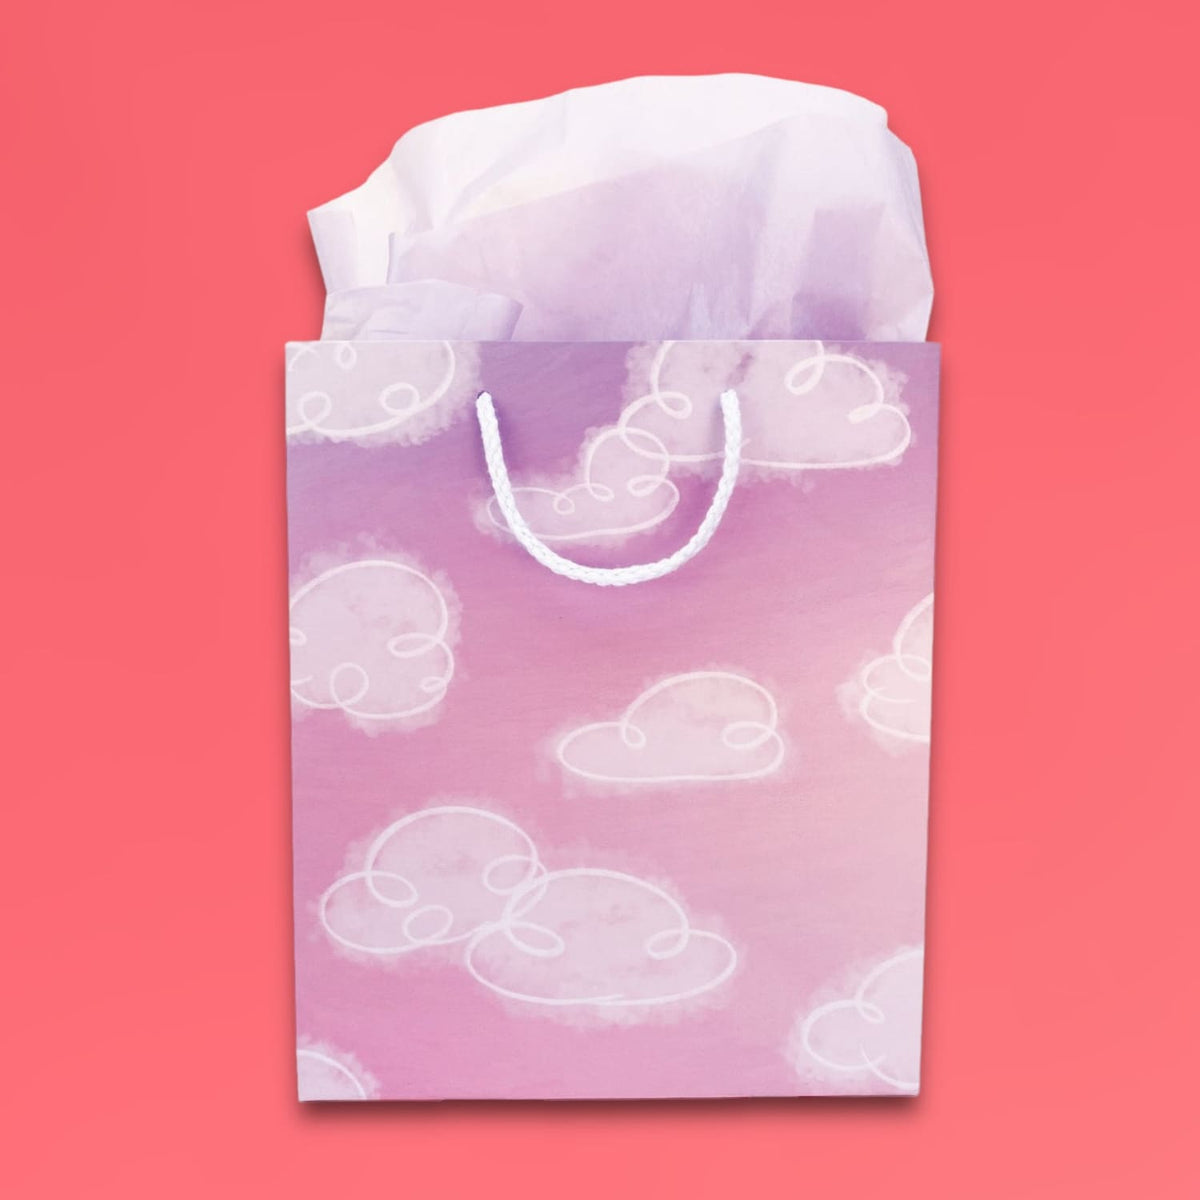 Clouds Gift Bag Birthday Gift - Clouds - Bag - Bags + Wrap -